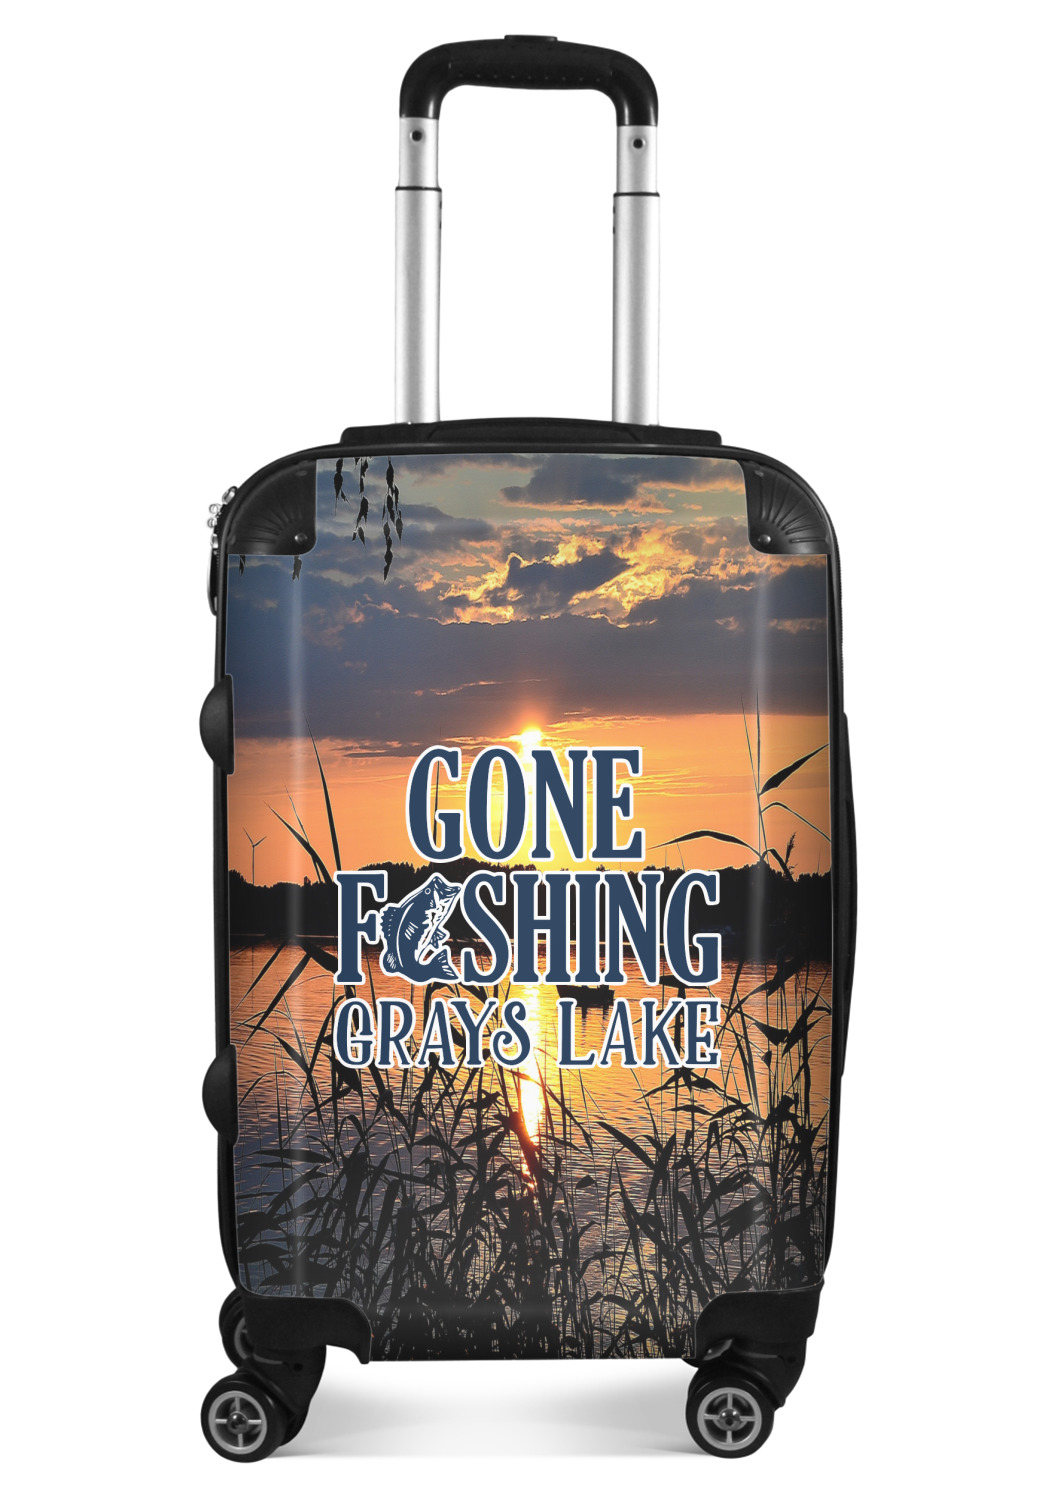 https://www.youcustomizeit.com/common/MAKE/1038229/Hunting-Fishing-Quotes-and-Sayings-Carry-On-Travel-Bag-With-Handle.jpg?lm=1669658271